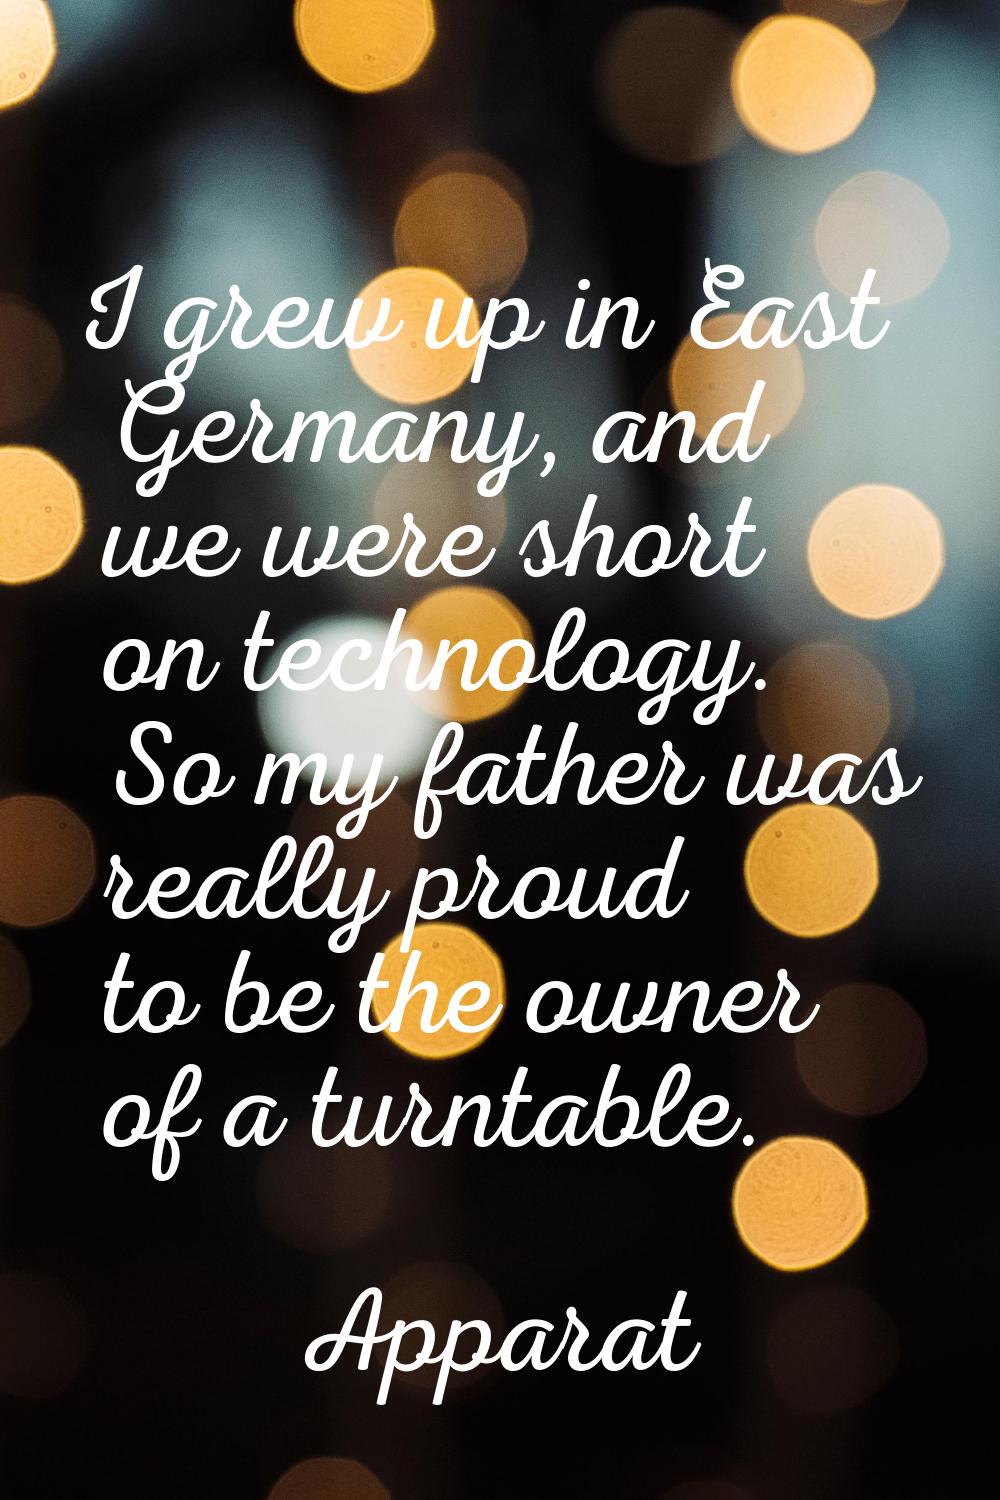 I grew up in East Germany, and we were short on technology. So my father was really proud to be the